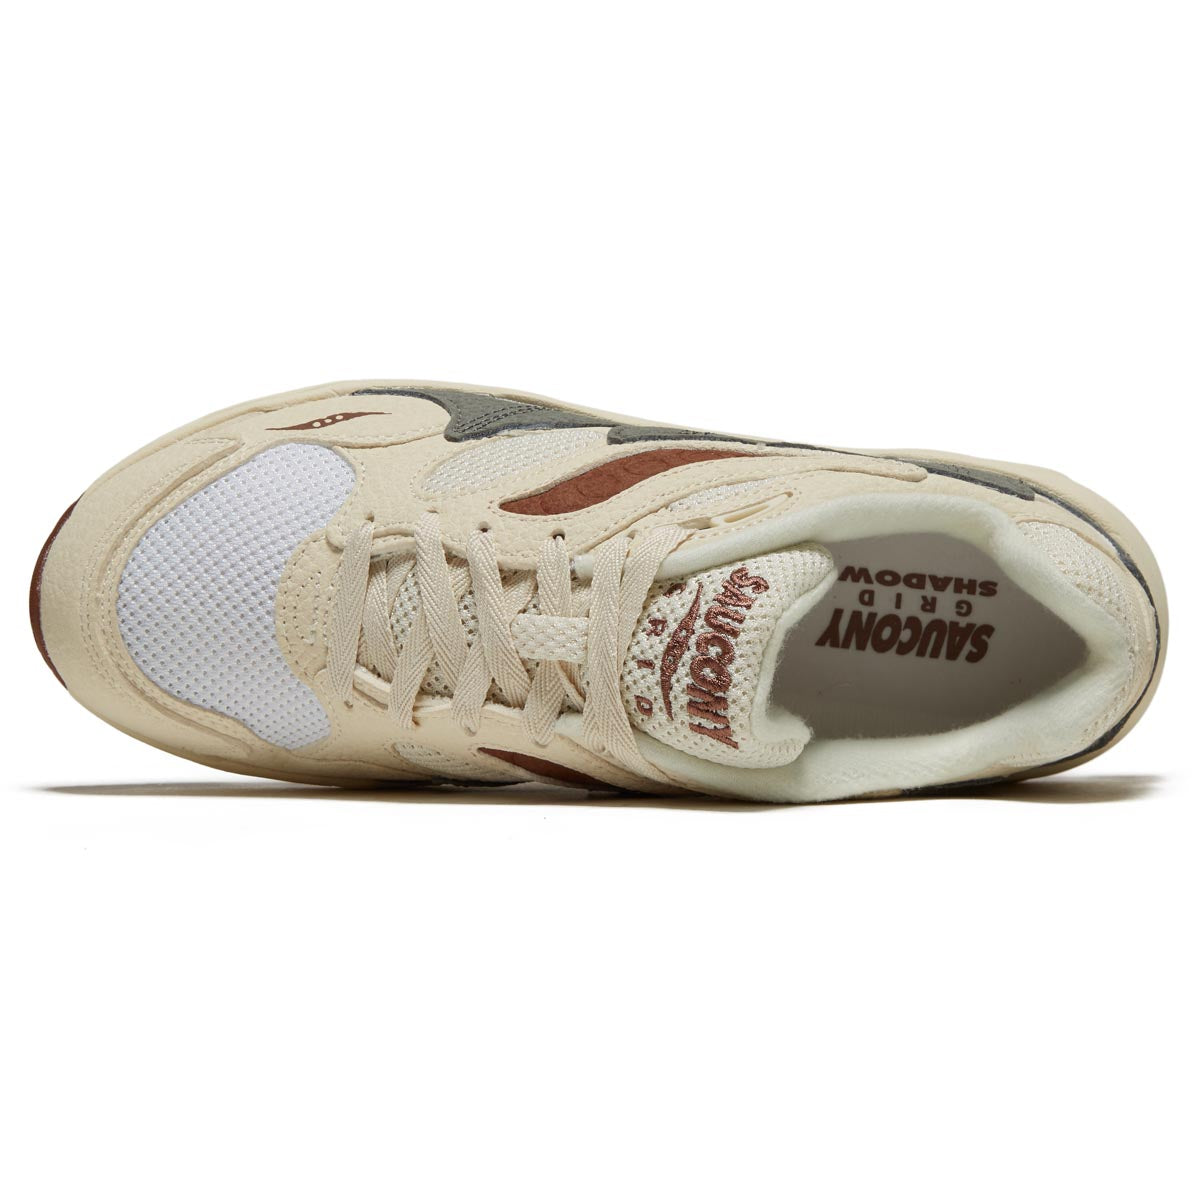 Saucony Grid Shadow 2 Shoes - Sand/Brown image 3